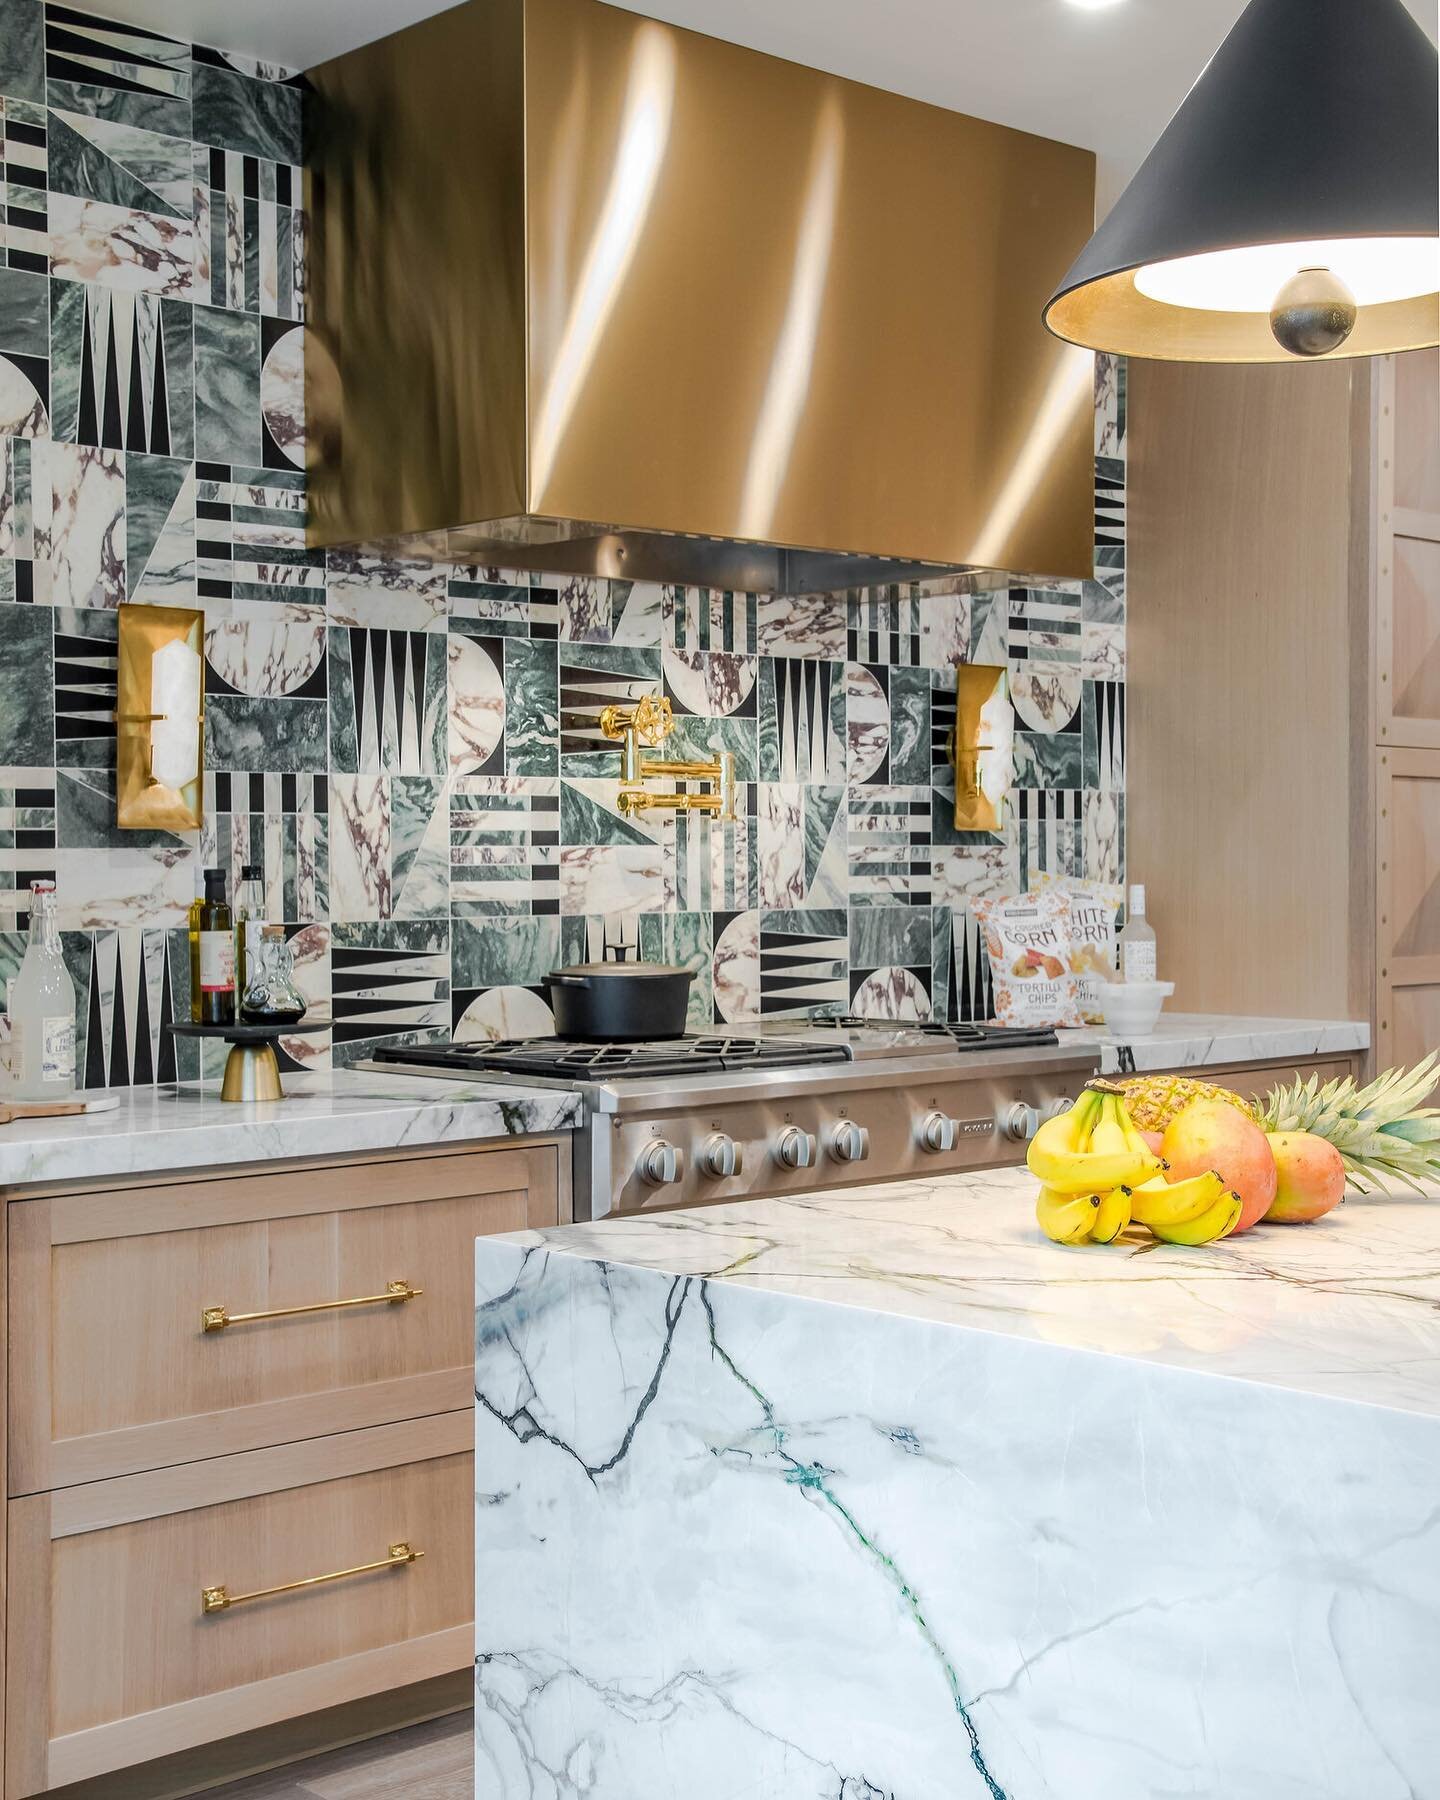 I just can&rsquo;t get enough of the bold colors and shapes of this Euclid tile. Here we contrasted it with natural wood cabinets and brass accents. Out with the old, and in with the bold!
#luxurykitchendesigns #luxurydesigners #sanantoniodesigners #